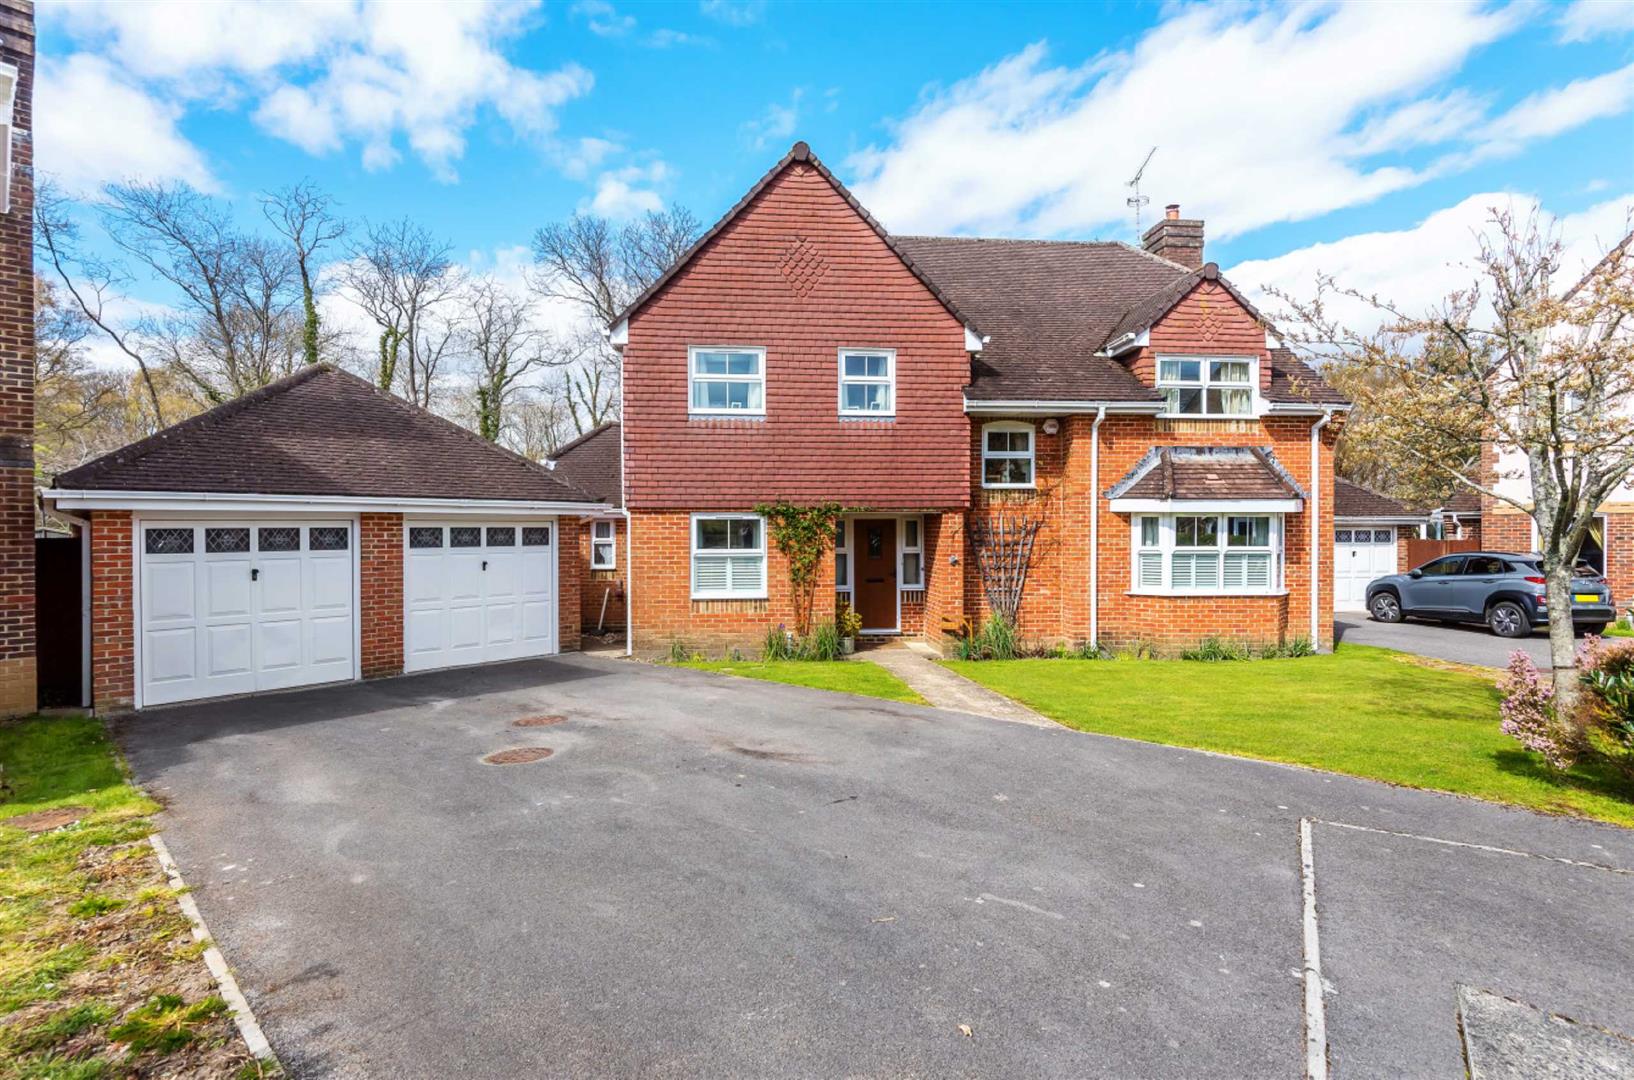 Goldwire Drive, Knightwood Park, Chandlers Ford